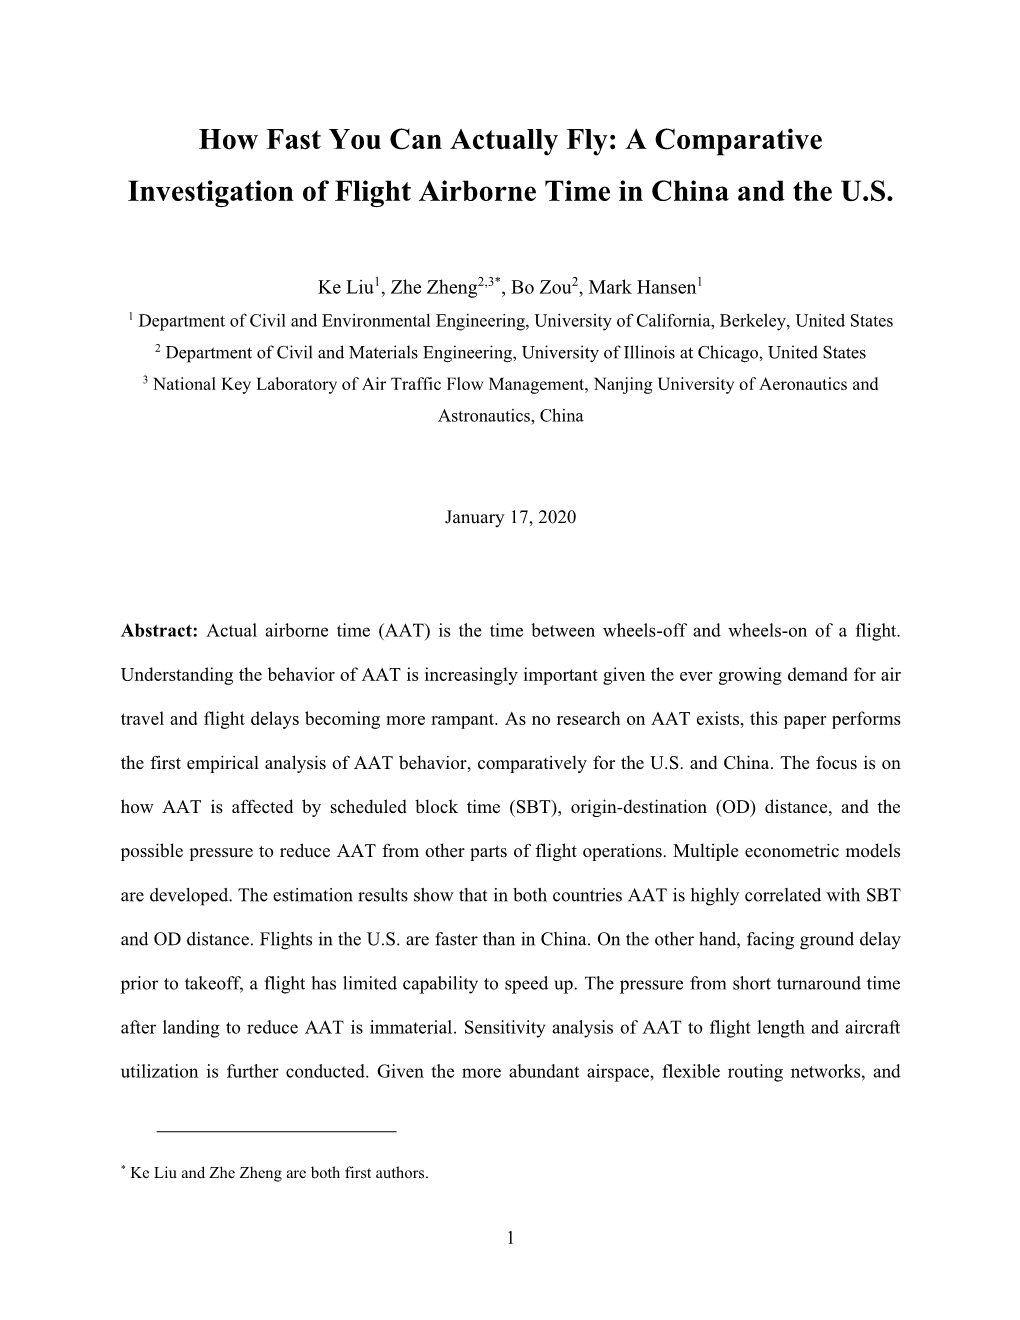 A Comparative Investigation of Flight Airborne Time in China and the U.S